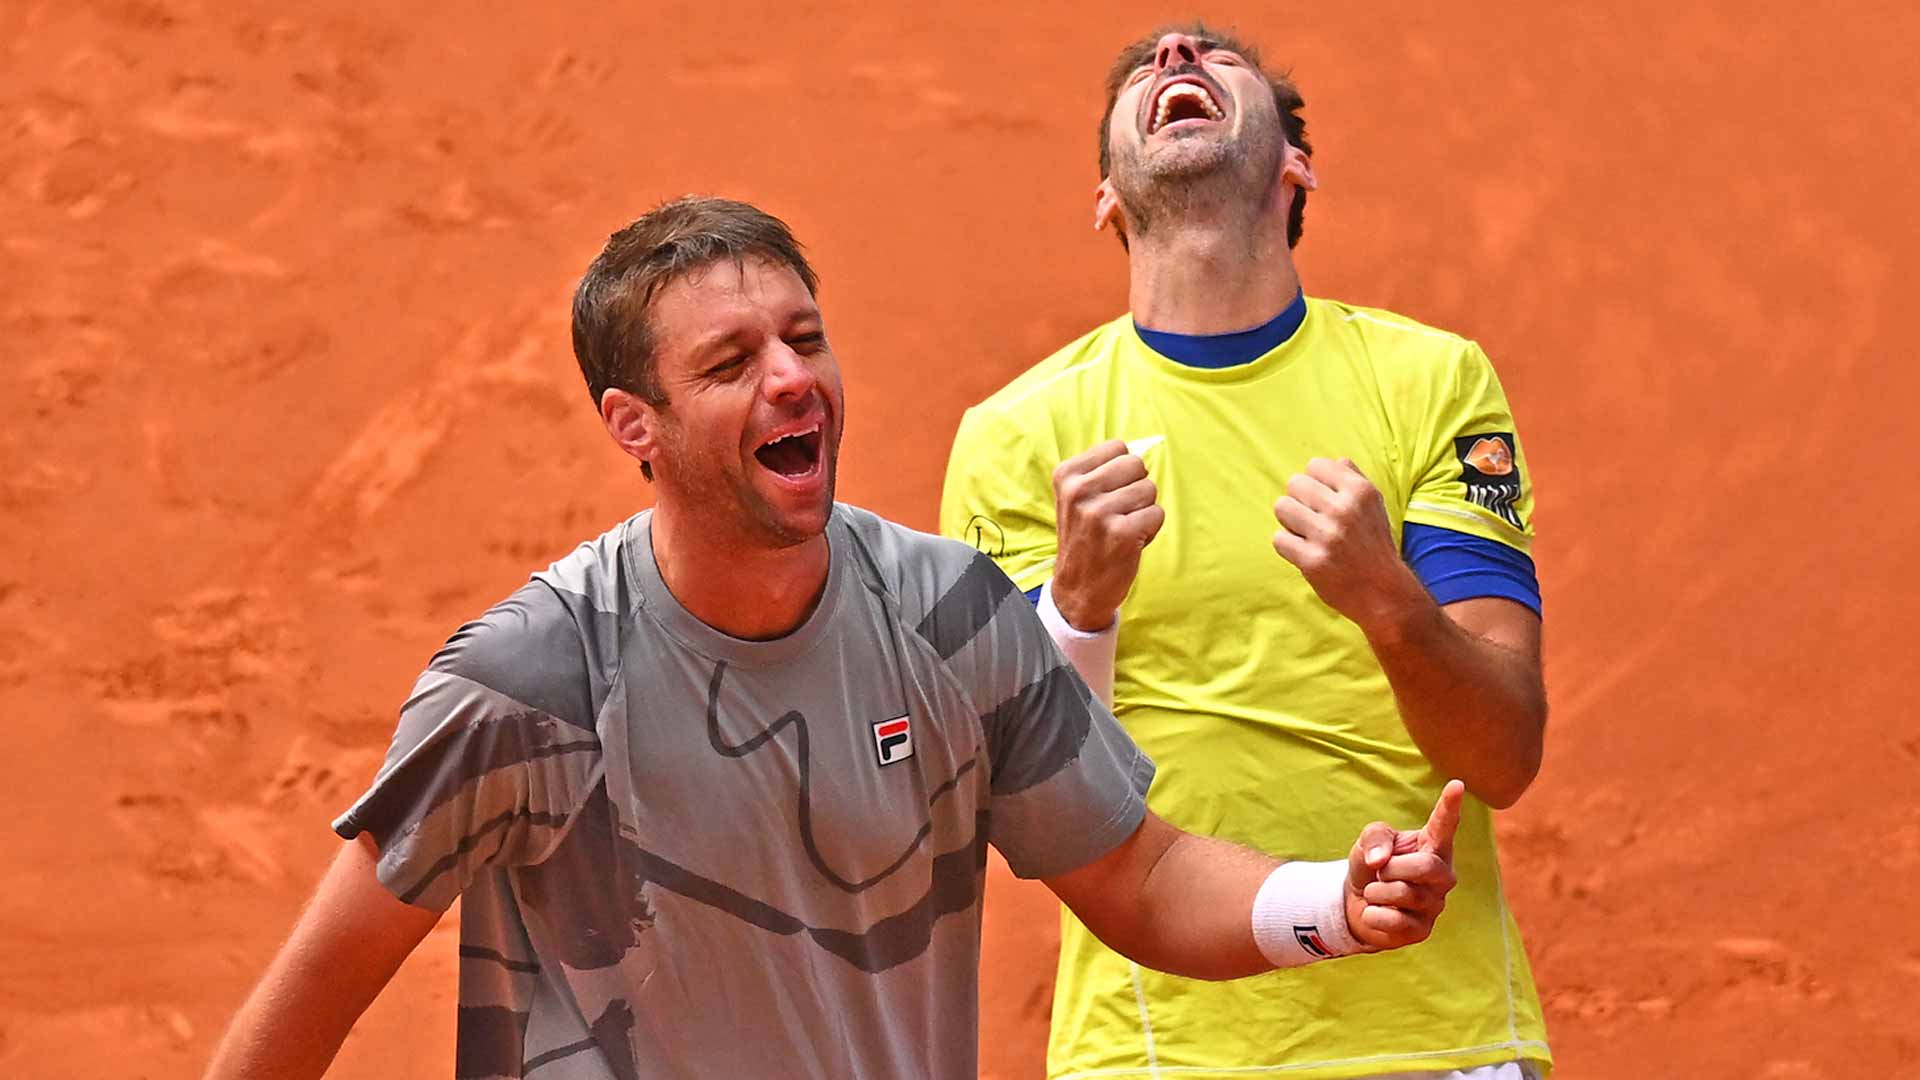 Granollers/Zeballos save 4 MPs to reach Madrid SFs & clinch No. 1